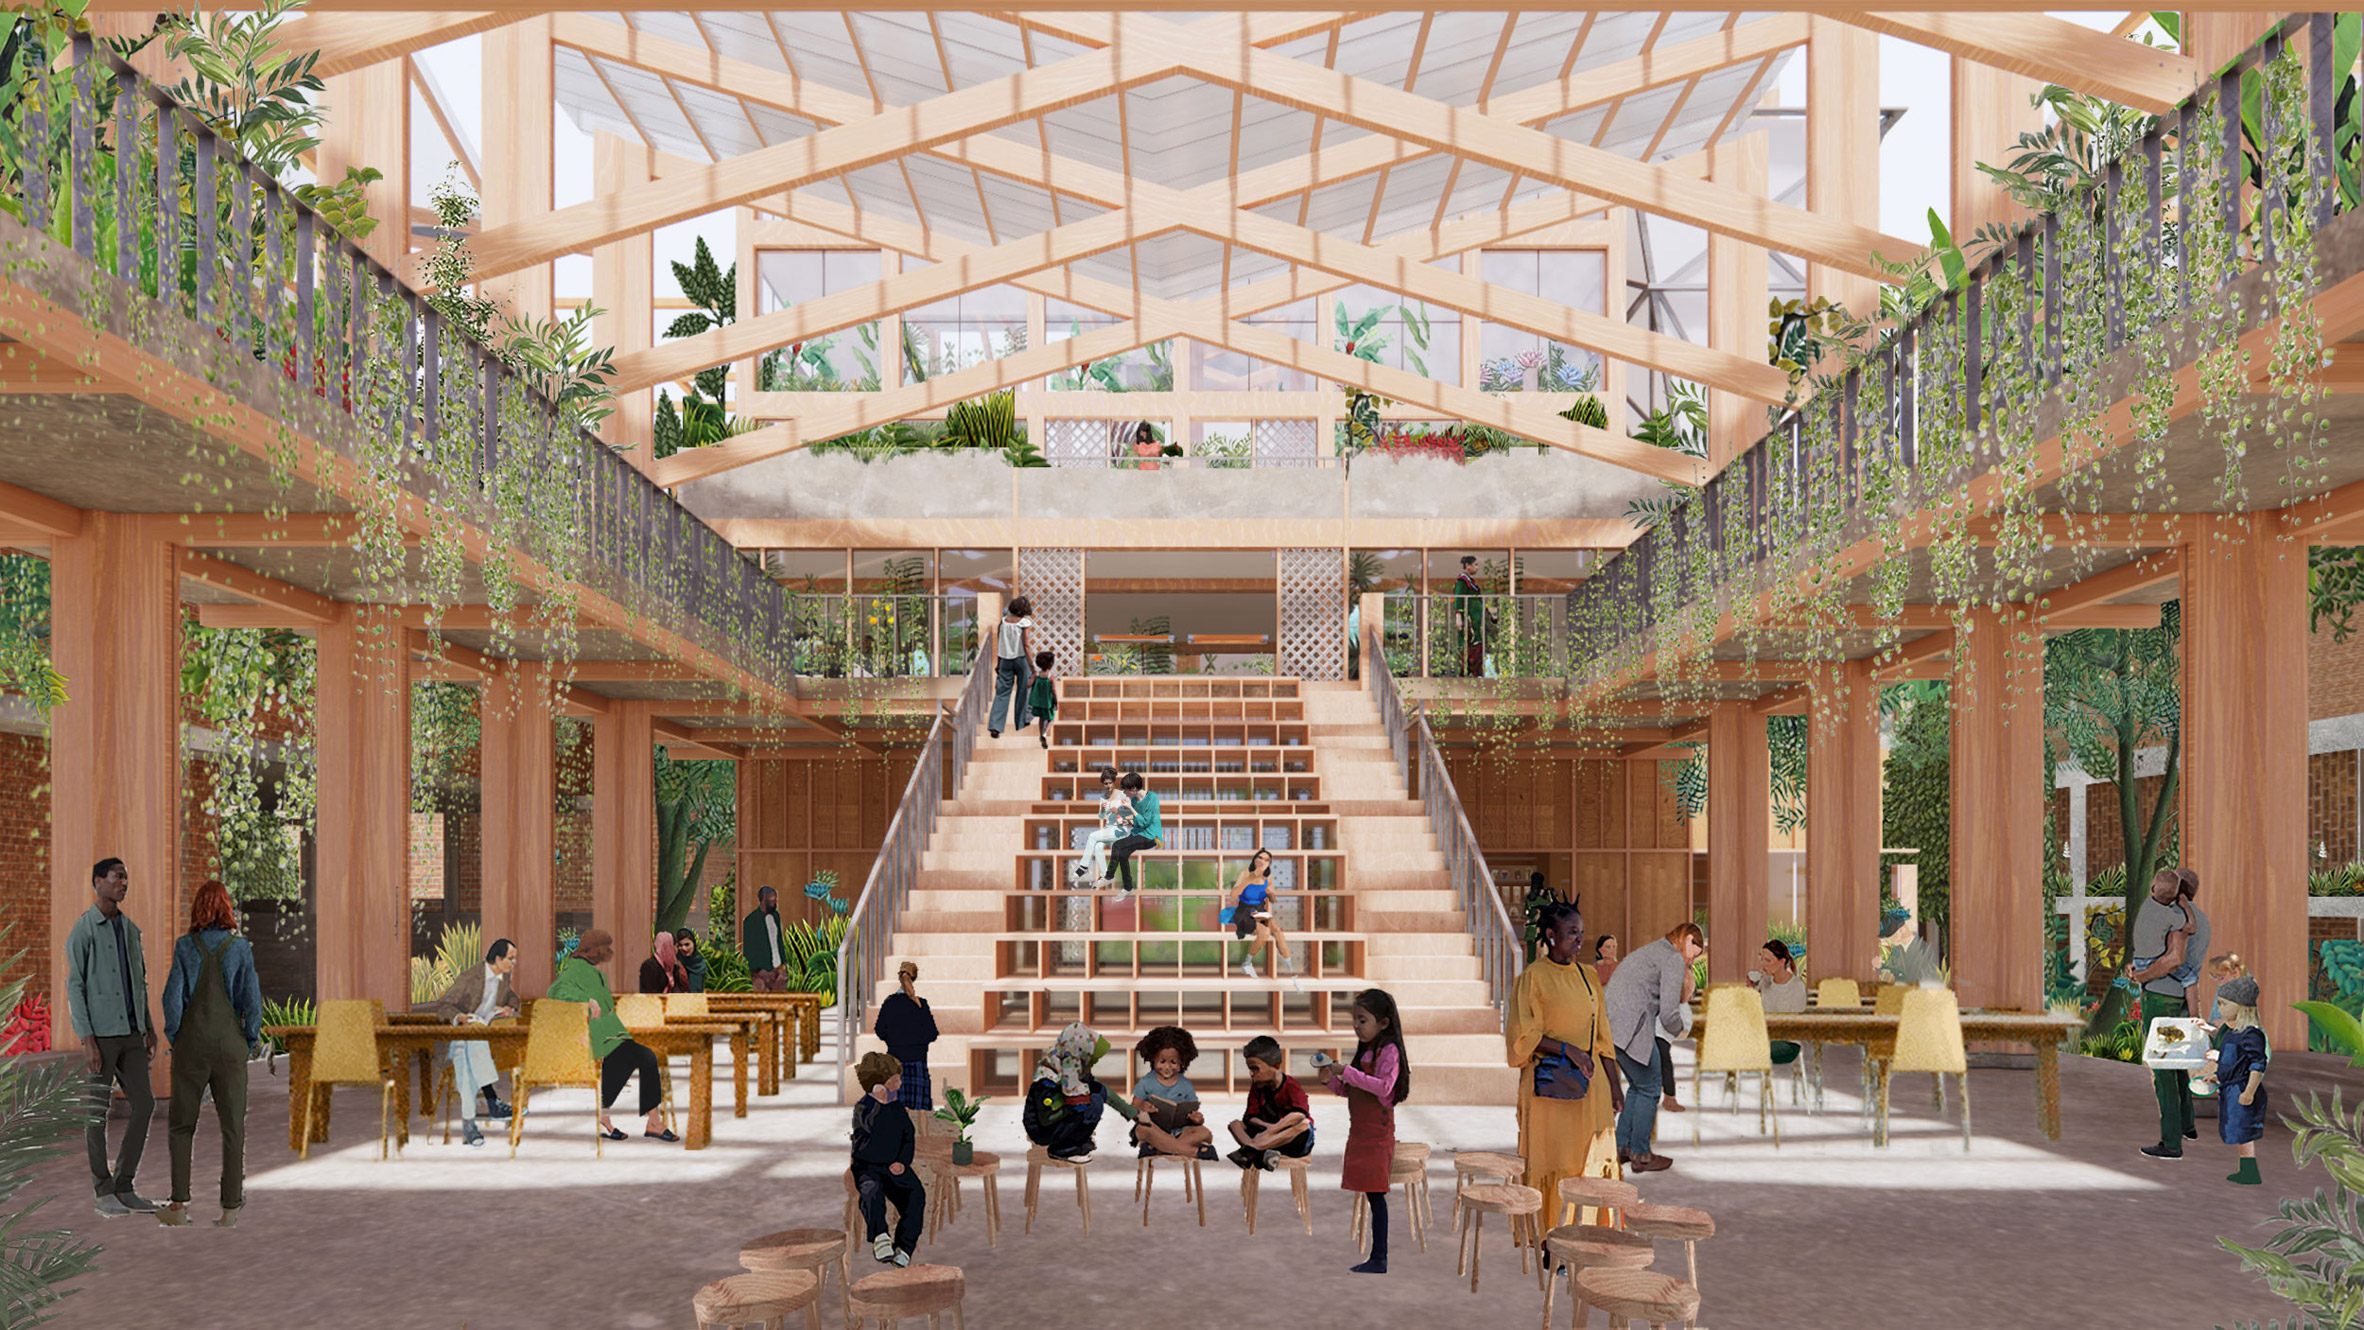 A visualisation of a plant-filled community space with high ceilings and big windows